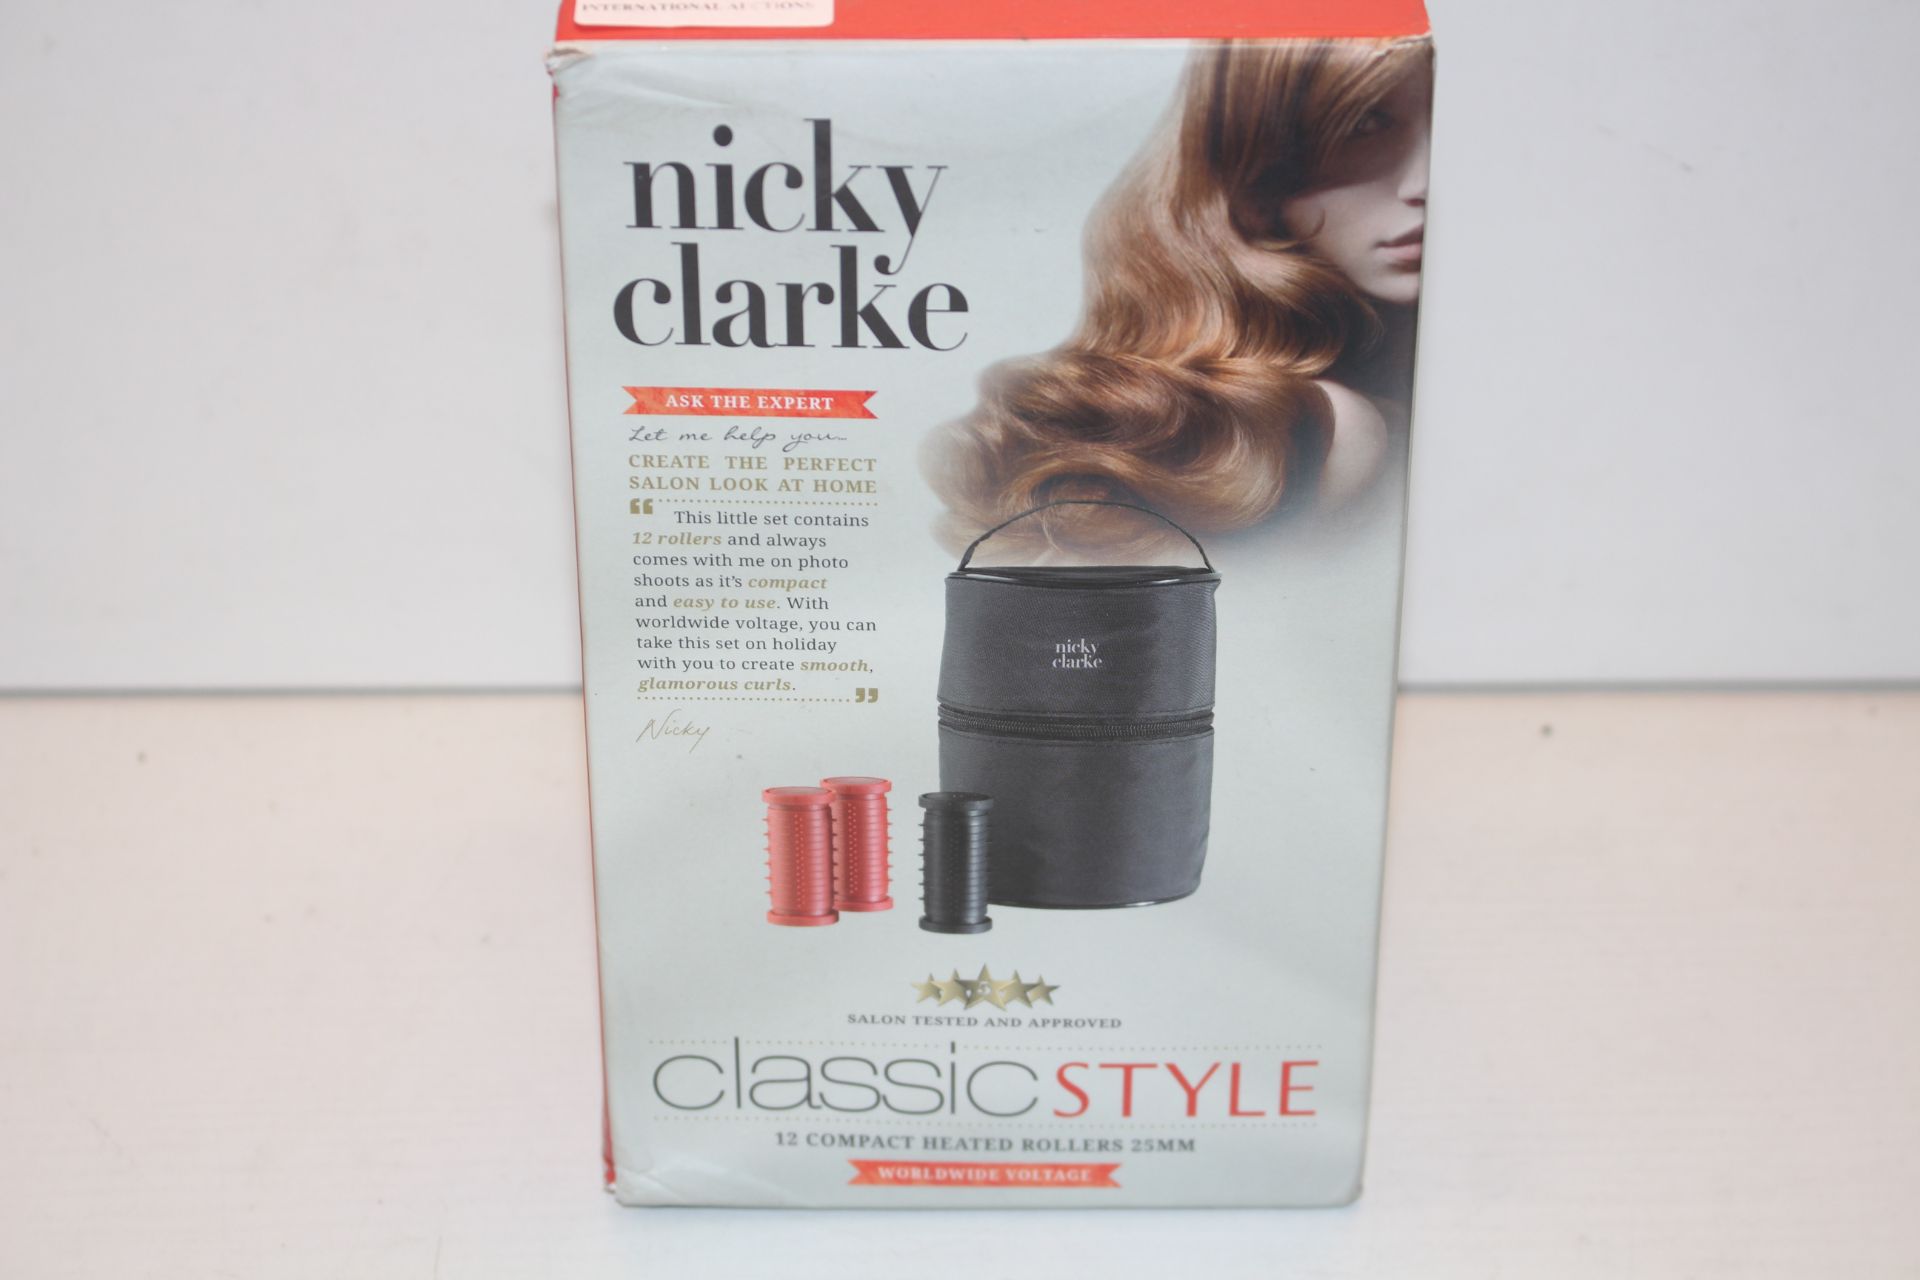 BOXED NICKY CLARKE CLASSIC STYLE 12 COMPACT HEATED ROLLERS 25MM RRP £27.00Condition